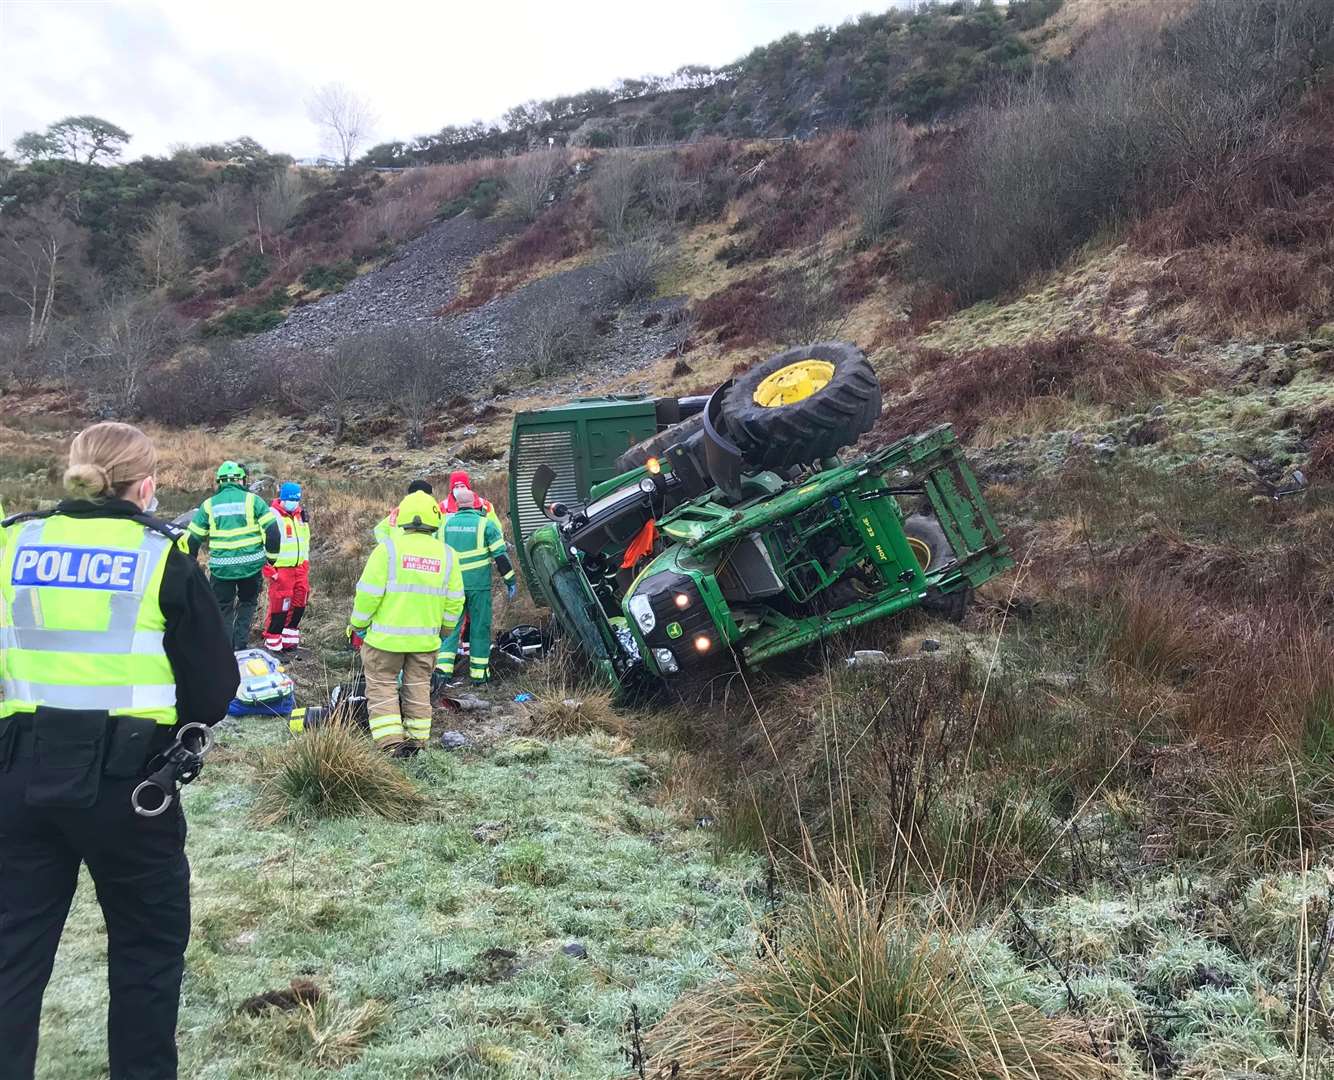 A man was airlifted to hospital following an accident near Fyvie involving an tractor and trailer which left the road. Picture: Courtesy of SCAA.